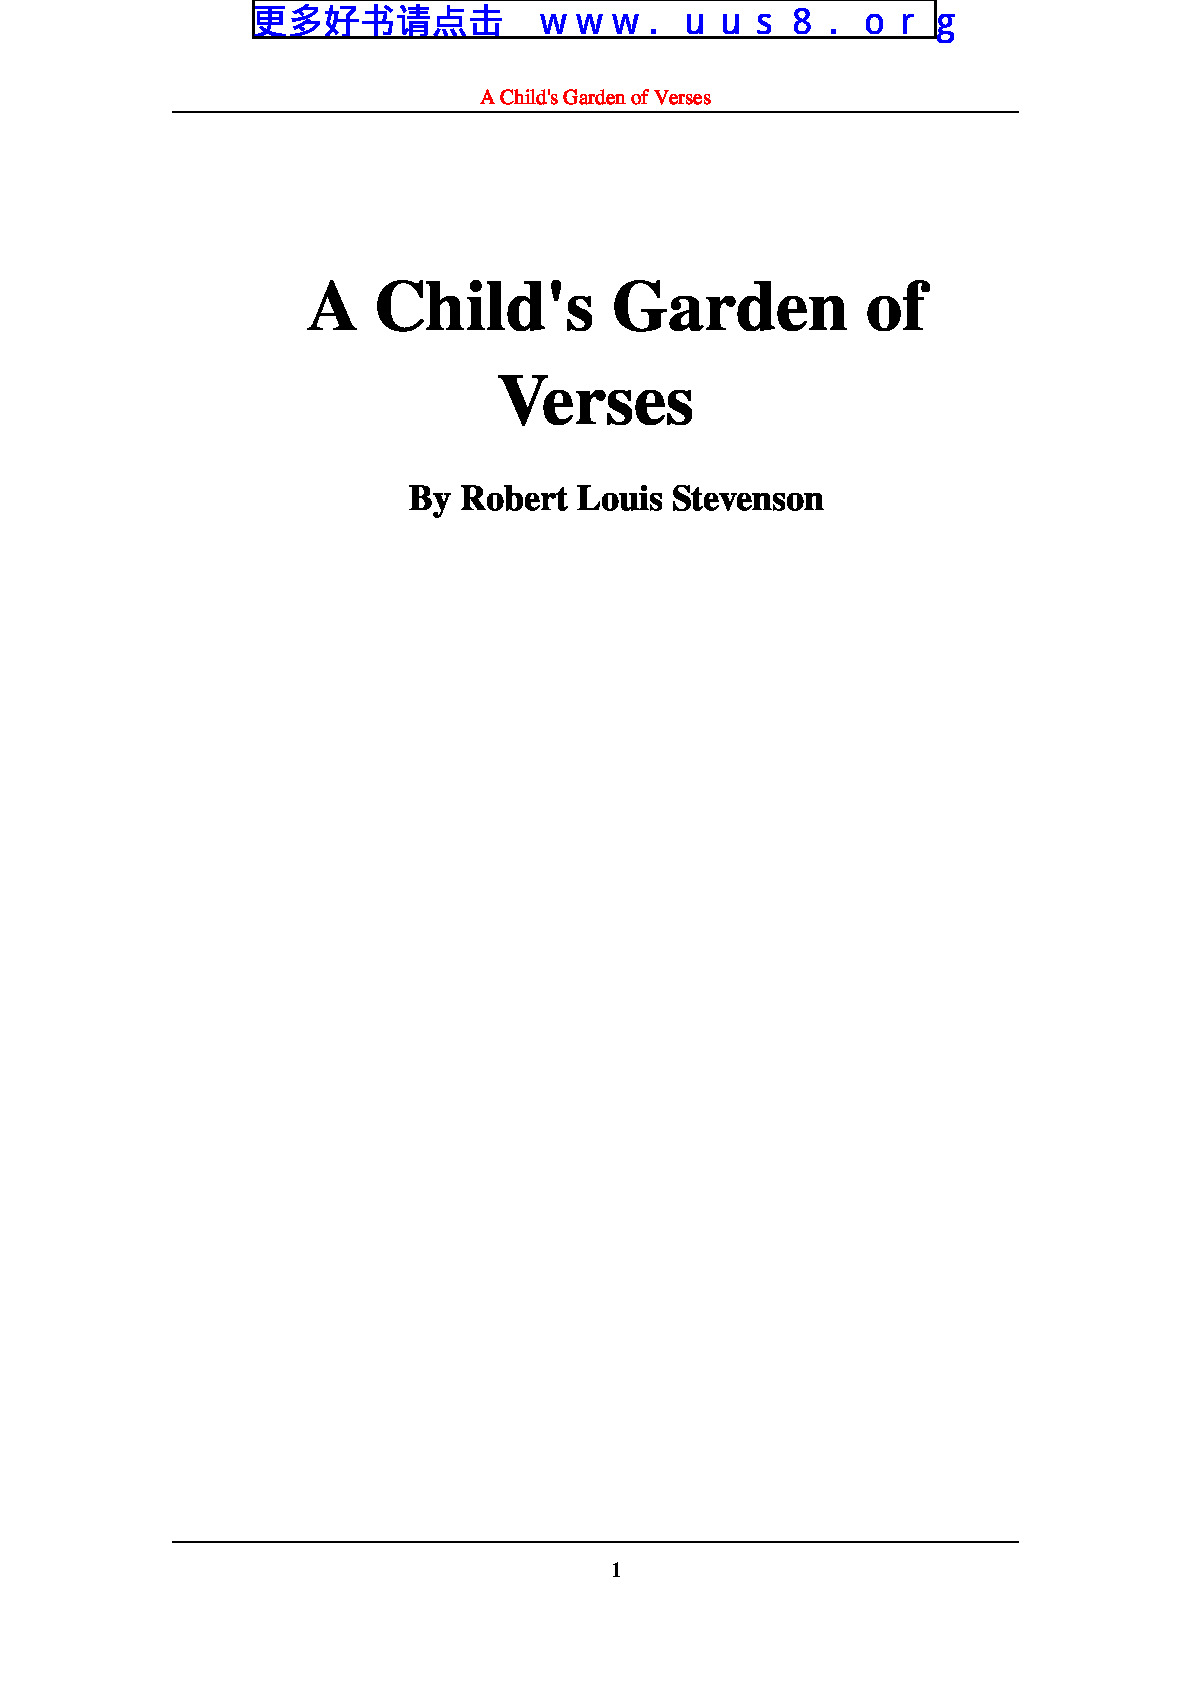 a_child’s_garden_of_verses(一个孩子的诗园)